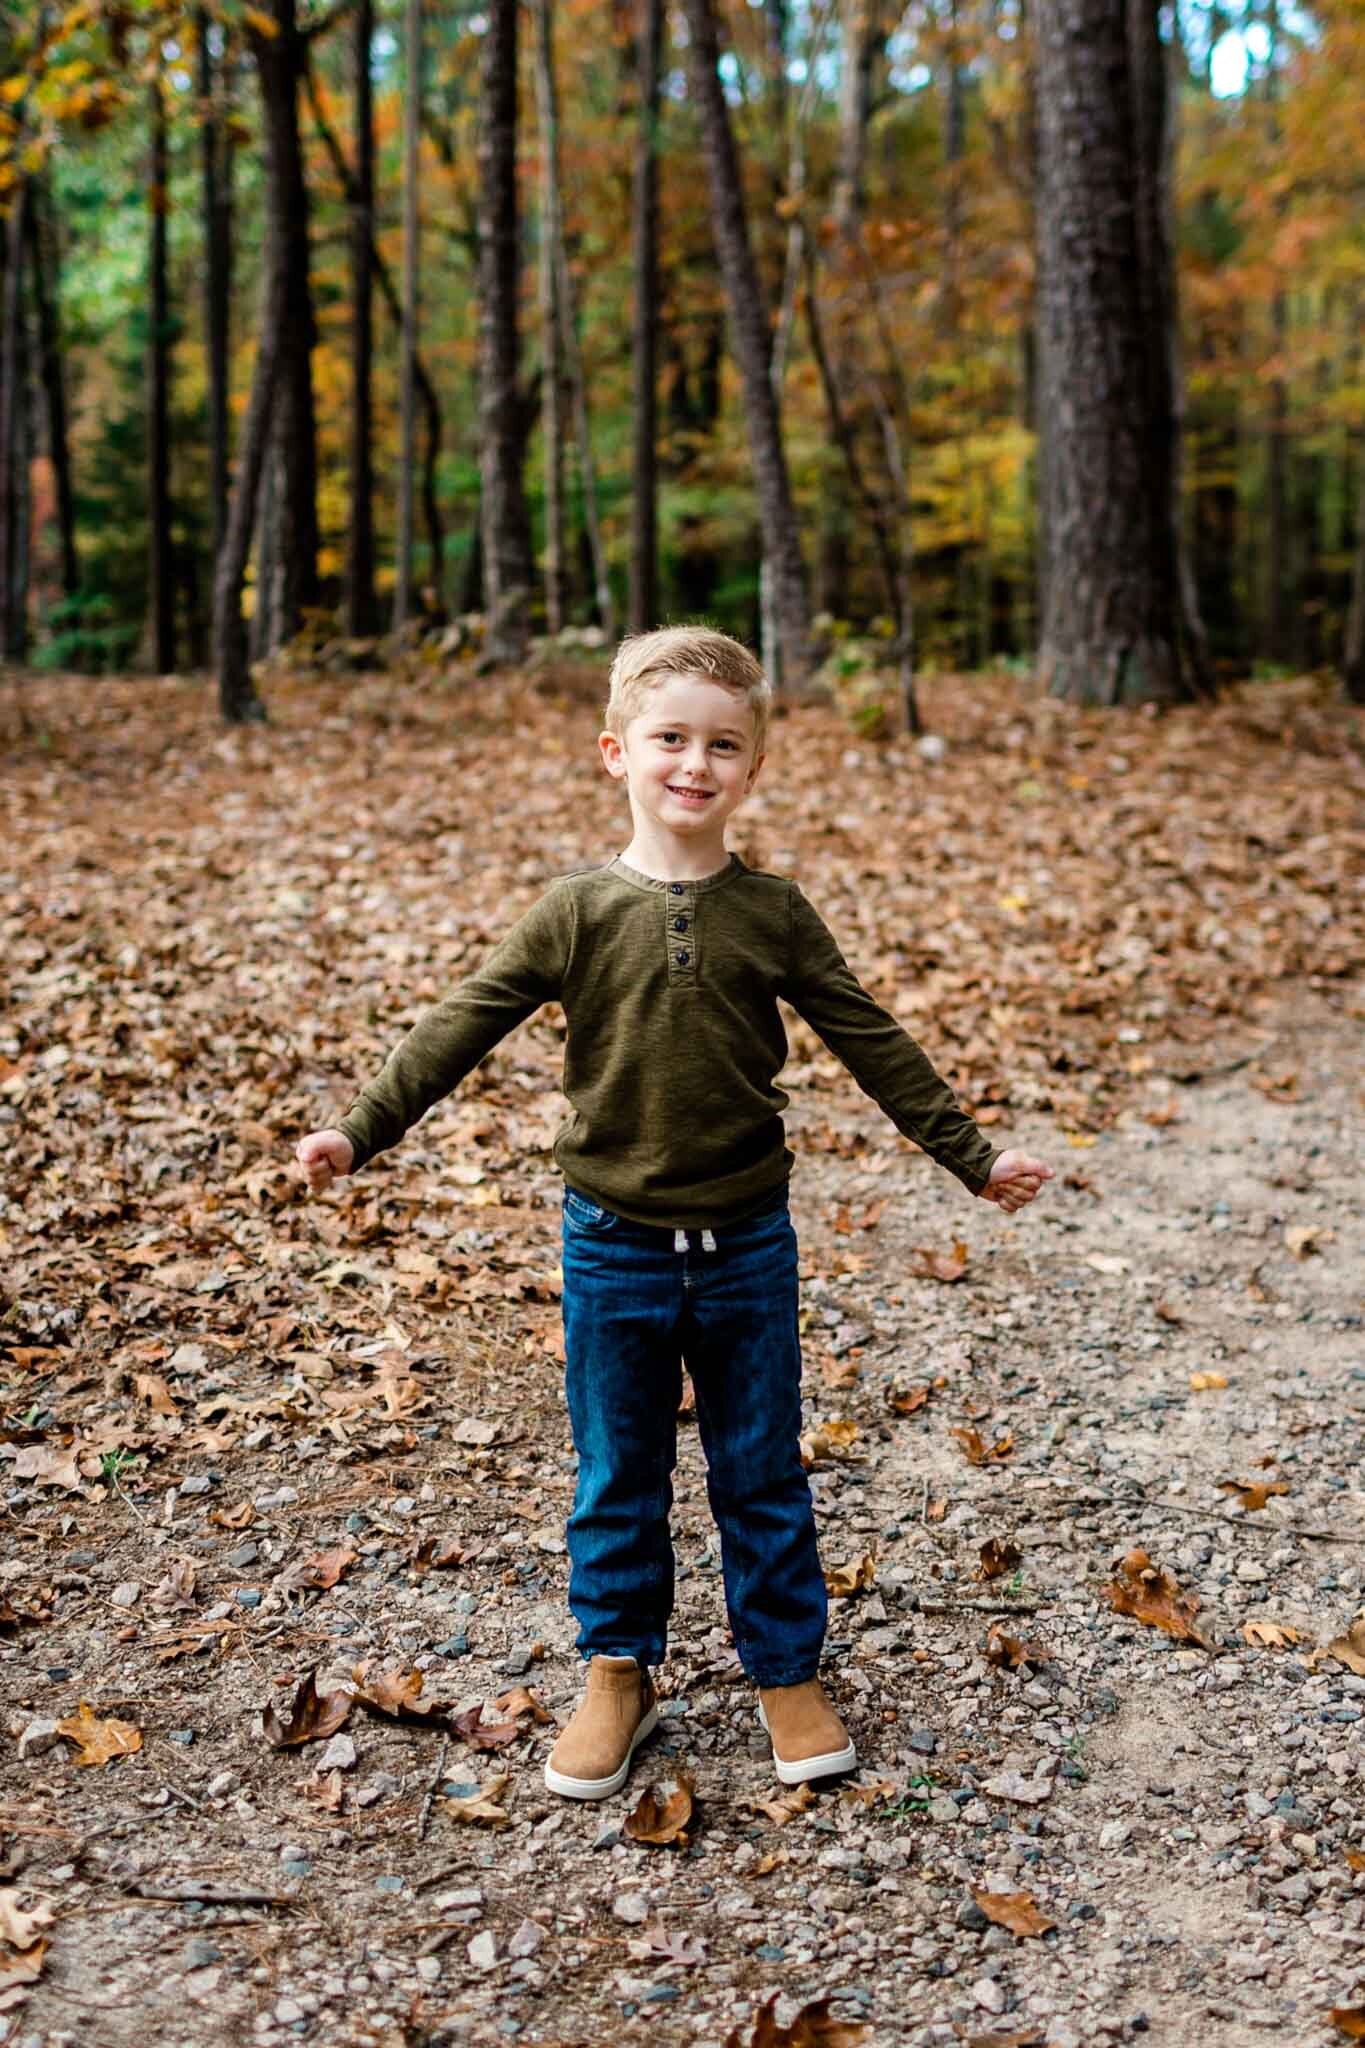 Raleigh Family Photographer at Umstead Park | By G. Lin Photography | Young boy smiling with arms out